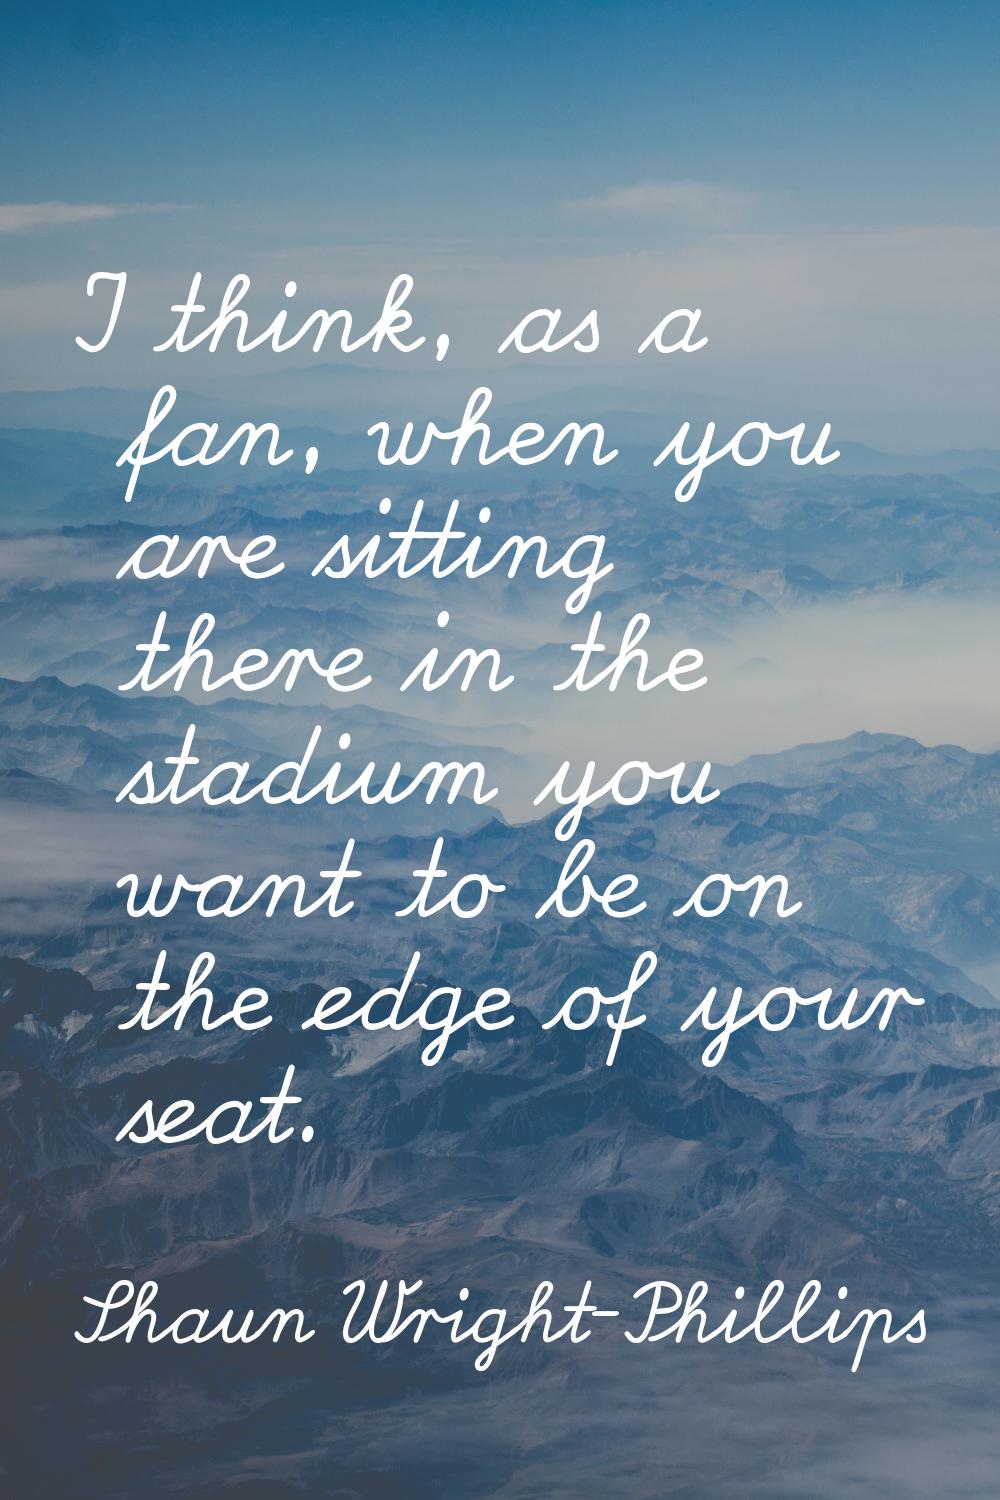 I think, as a fan, when you are sitting there in the stadium you want to be on the edge of your sea